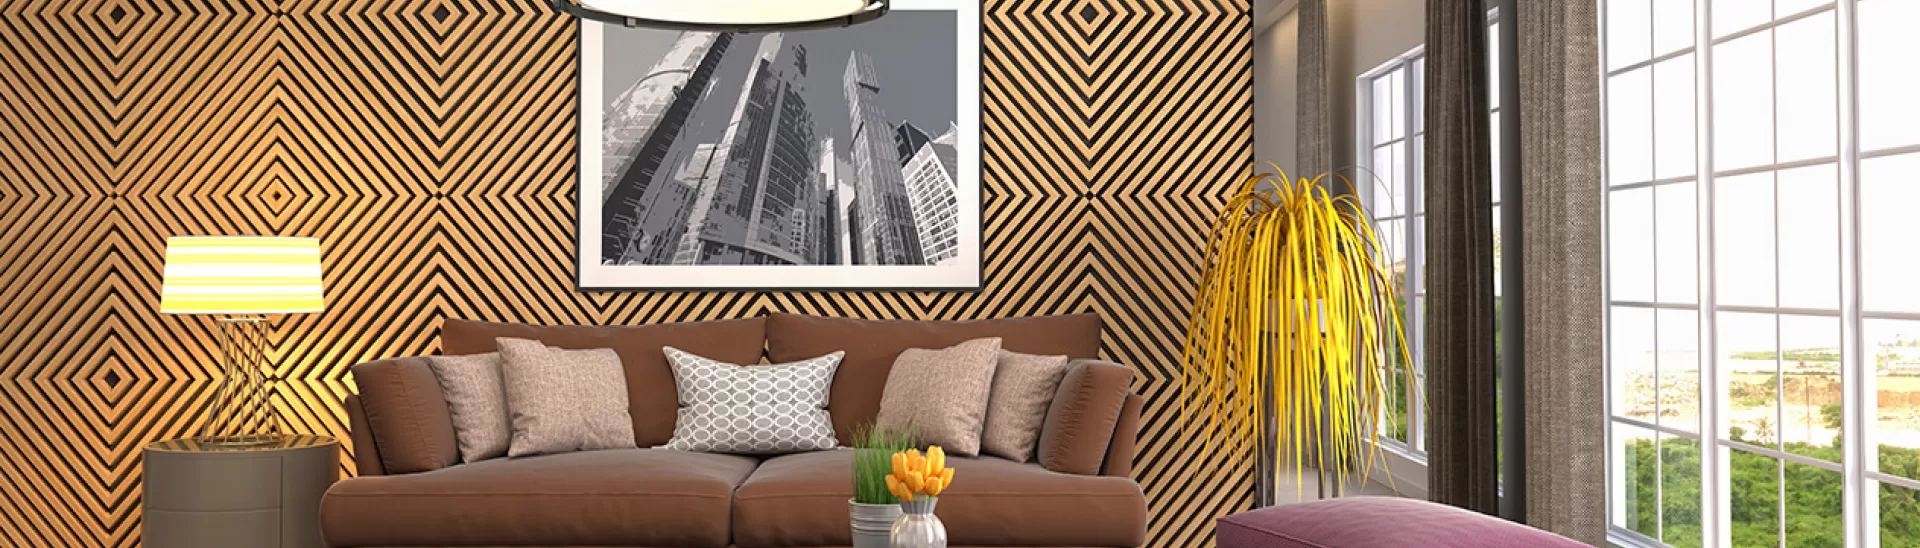 10 Beautiful Texture Paint & Design for Bedroom, Living room, & Hall Walls  - KnockFor